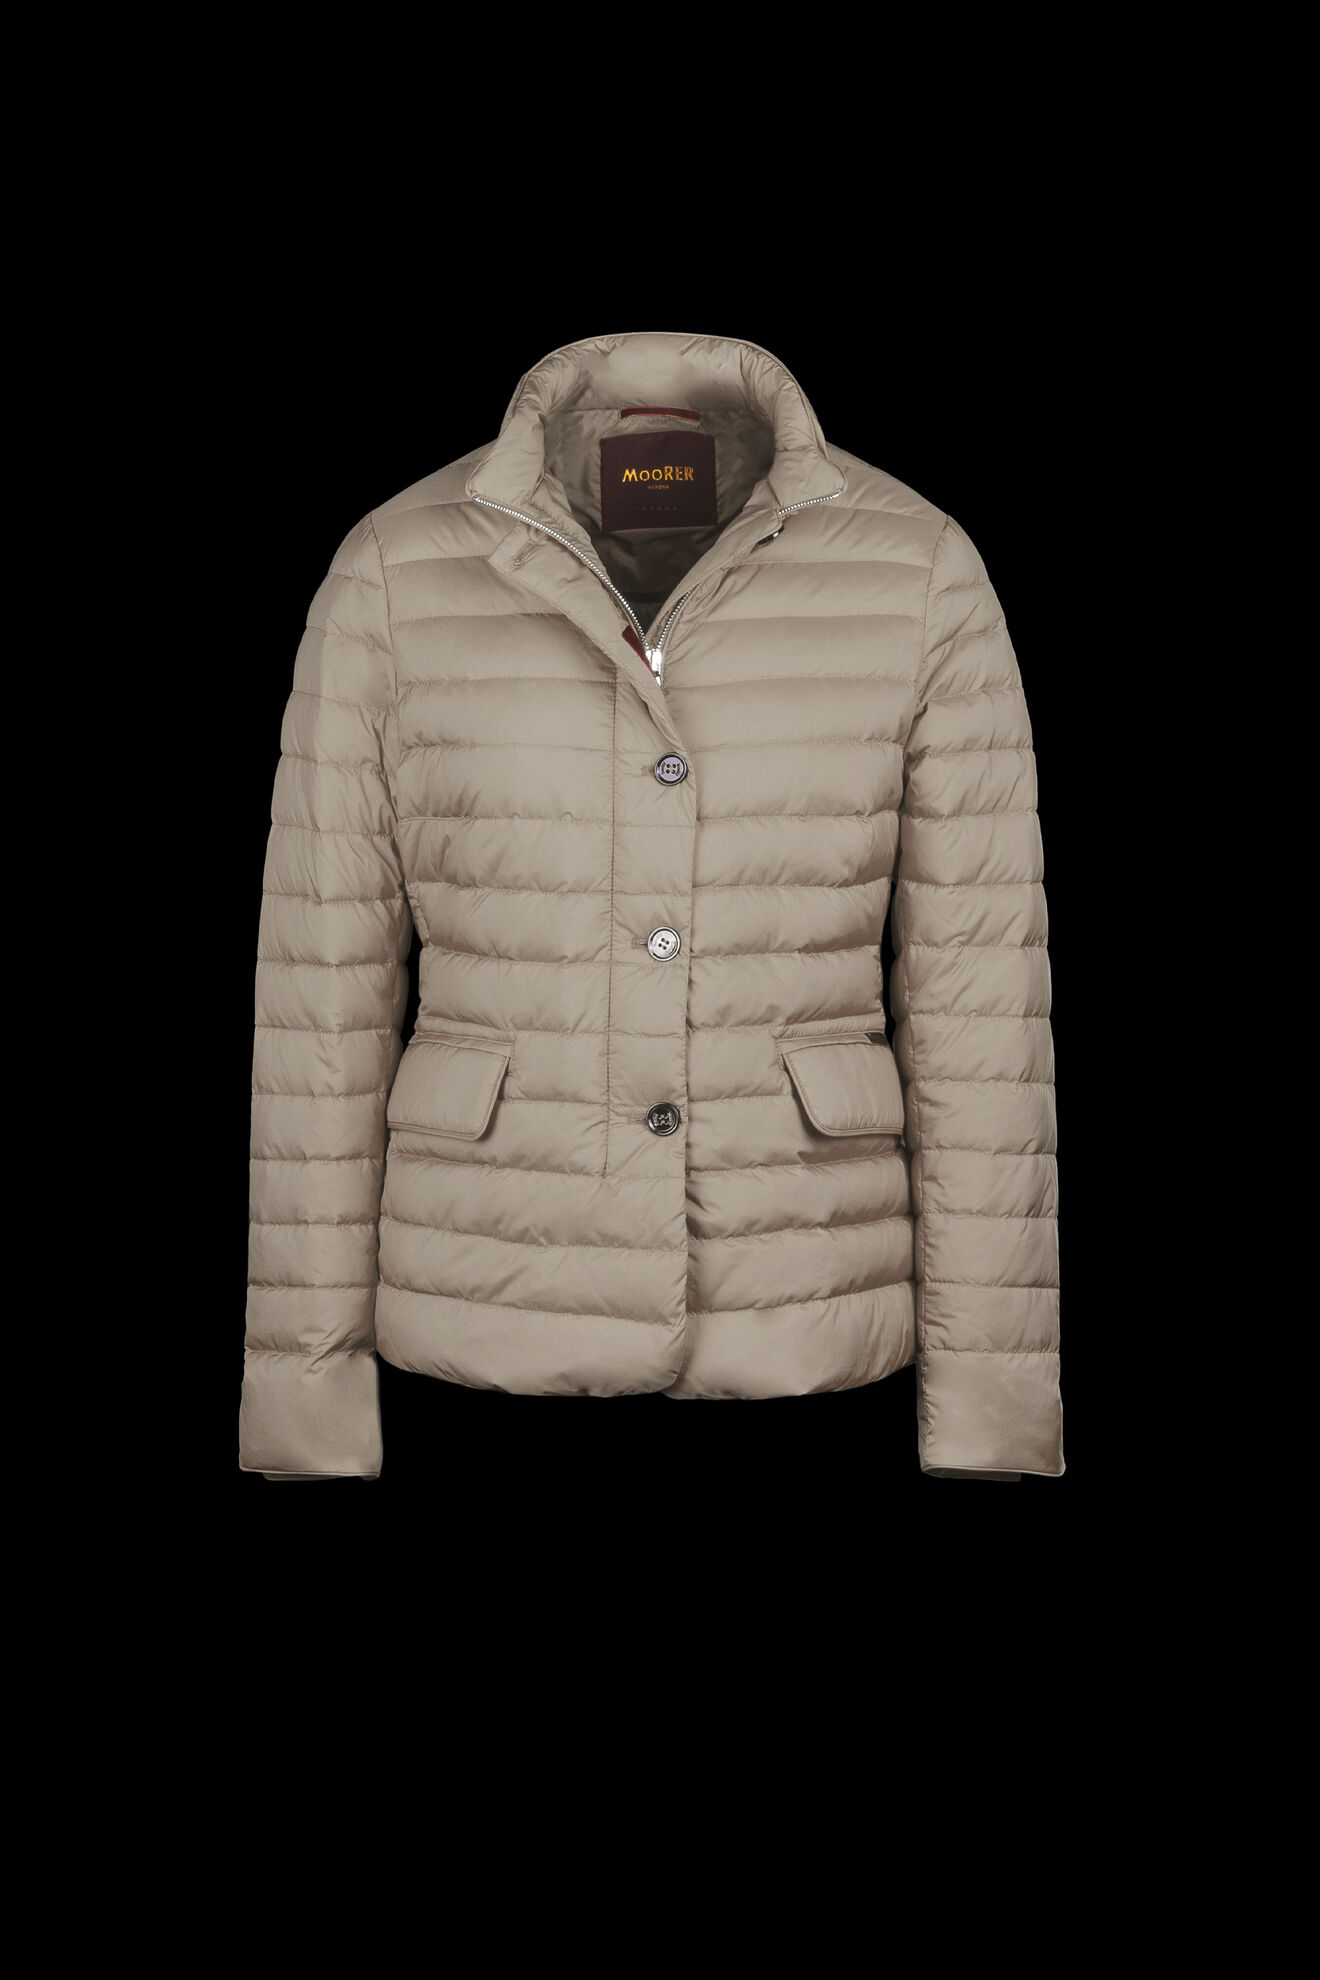 Unlock Wilderness' choice in the MooRER Vs Moncler comparison, the AISHA-S3 by MooRER